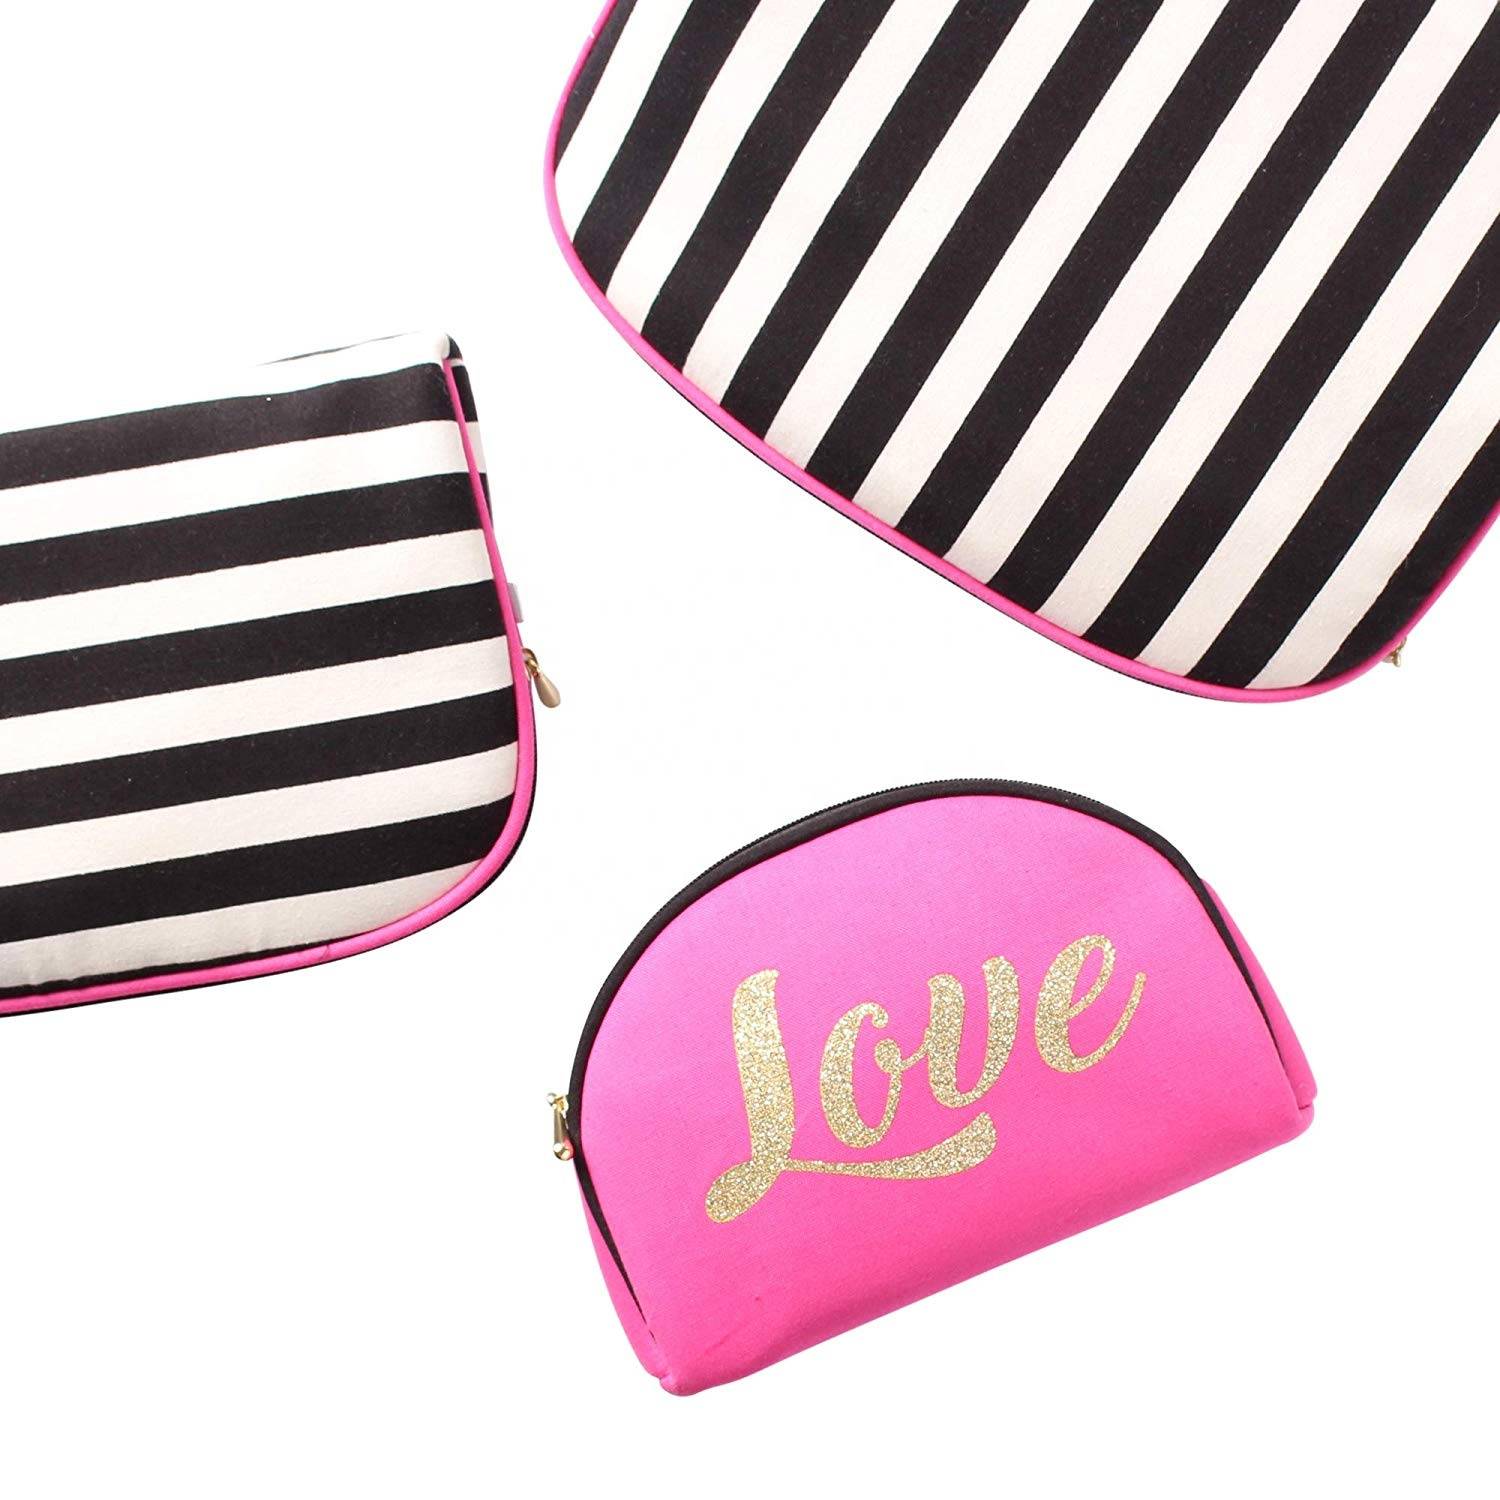 Birthday present Gift Idea Travel Accessories Cosmetic Bag 3 Piece Set Makeup Organizer Toiletry Pouch for Brushes/ Pencil Case